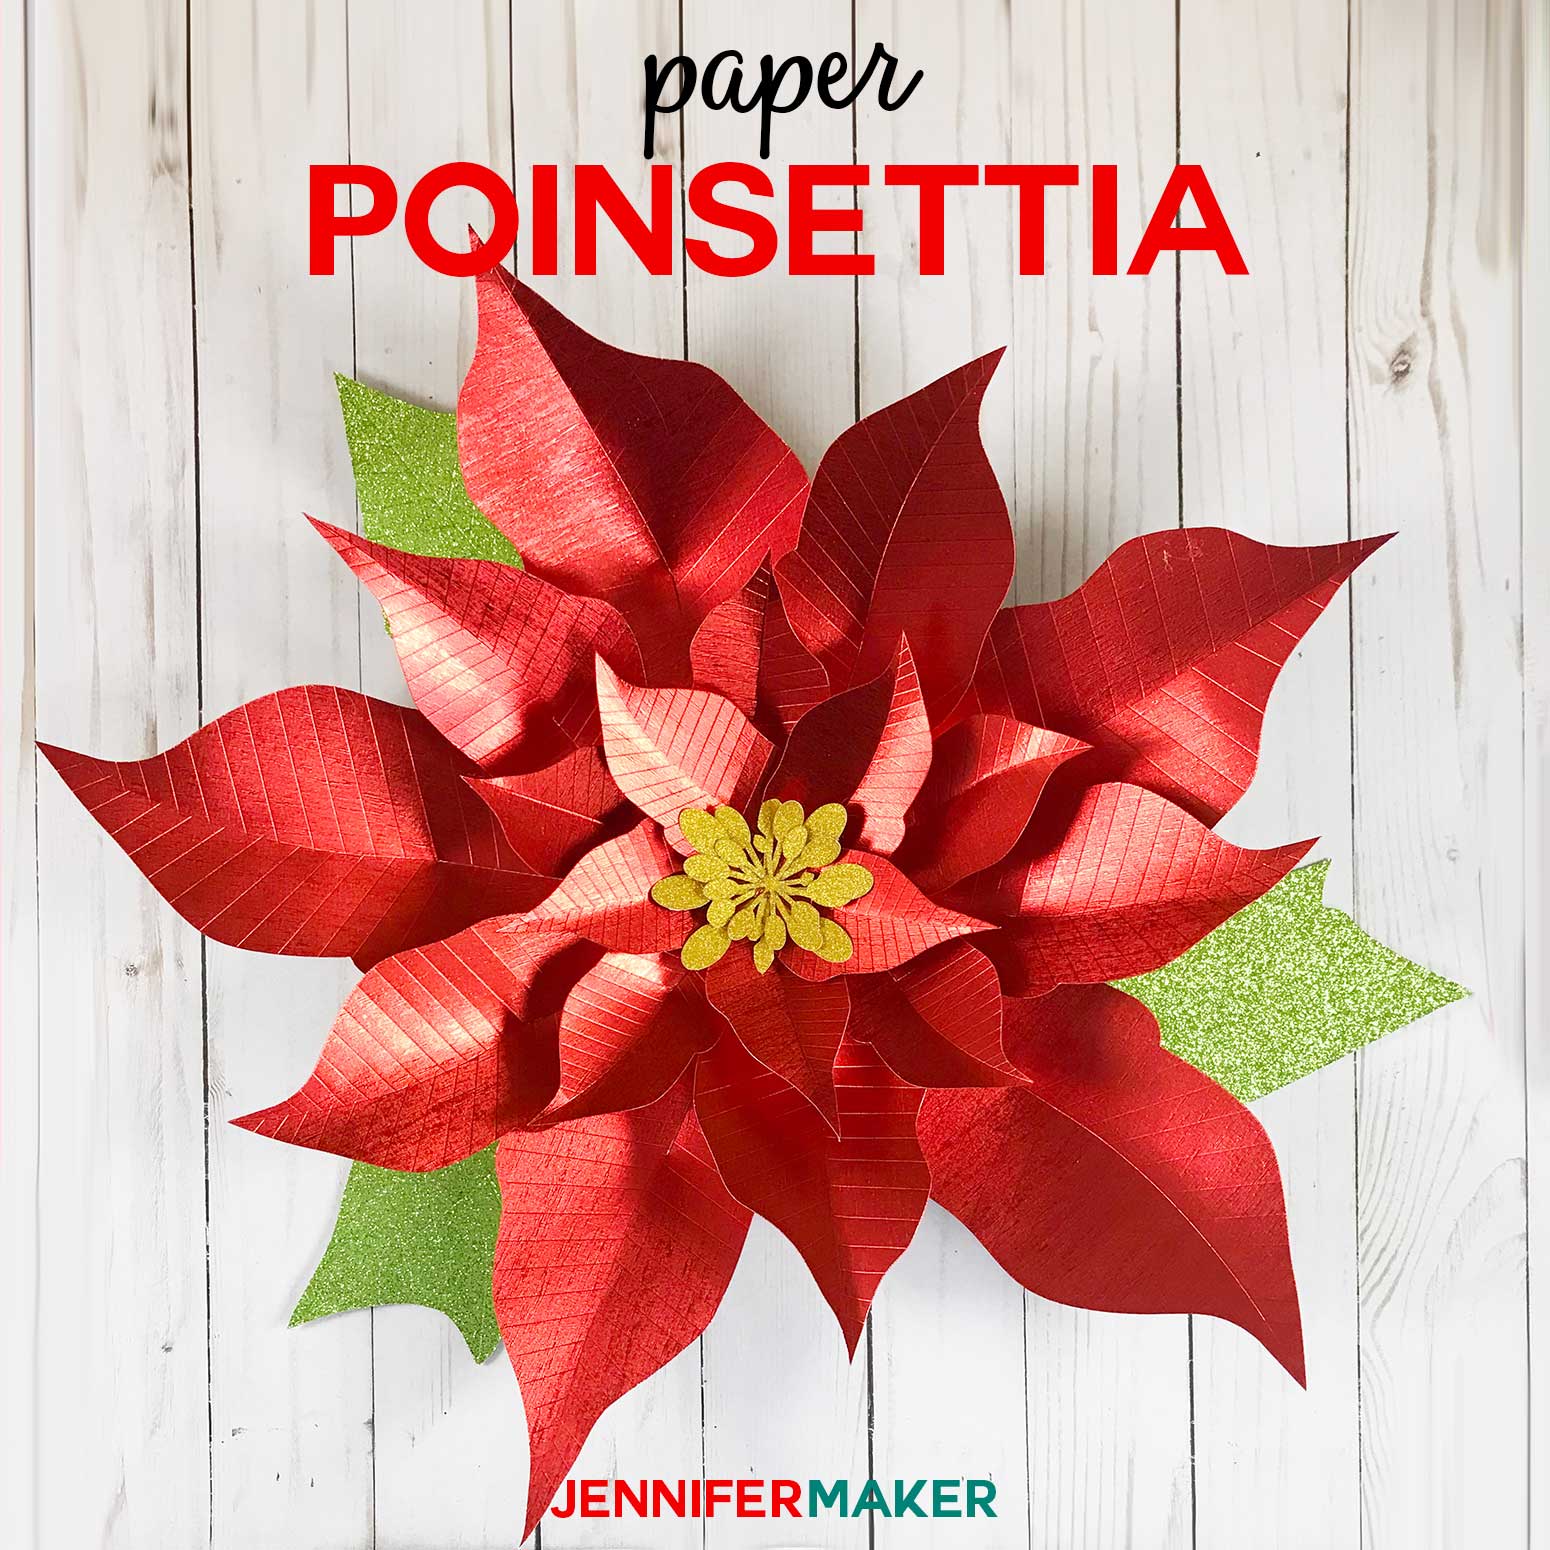 Giant Paper Poinsettia Fllower Pattern made on a Cricut! Free SVG cut files and pattern #cricut #papercrafts #paperflowers #holidaydecor